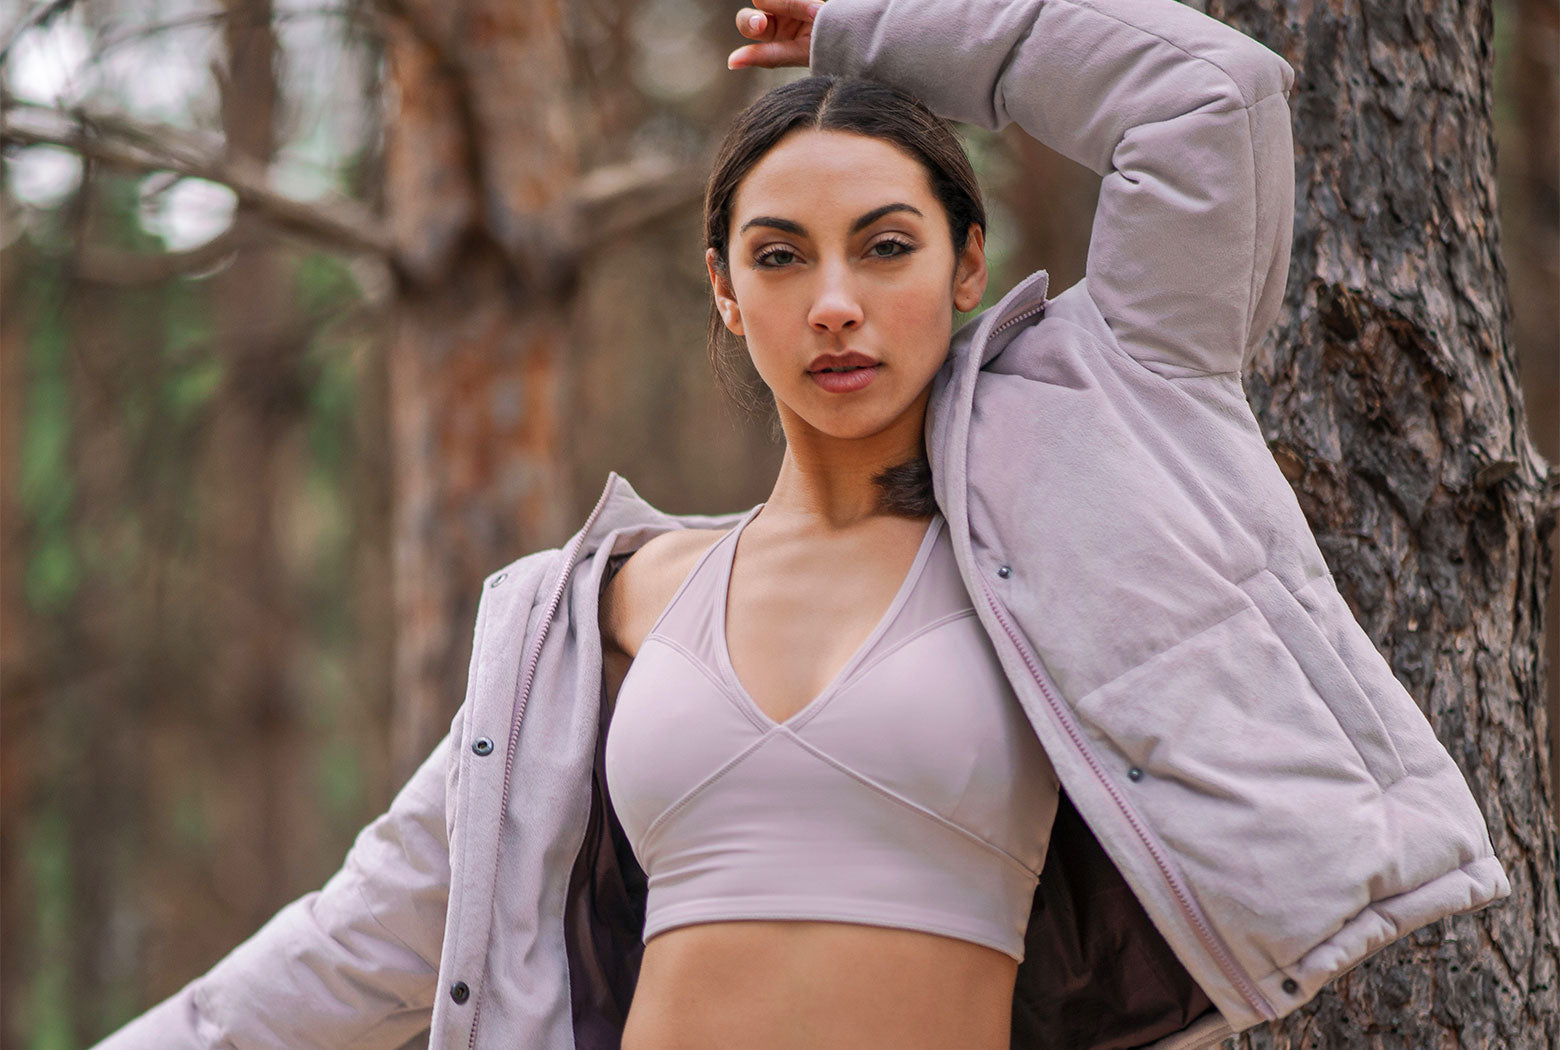 Female model wearing a pink jacket and sports bra